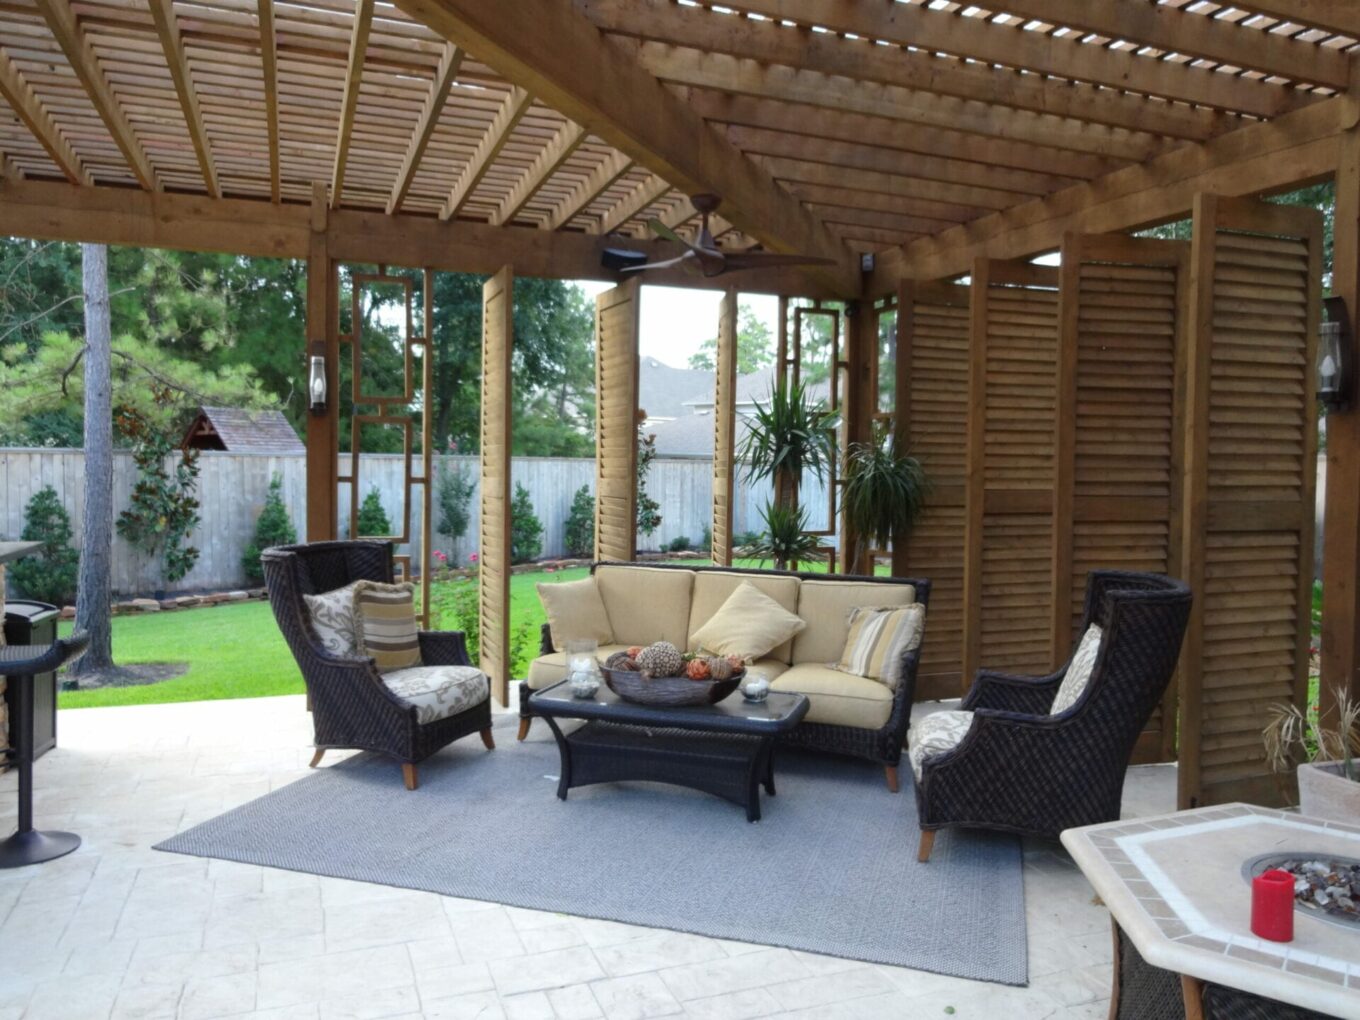 A patio with furniture and a pergola.